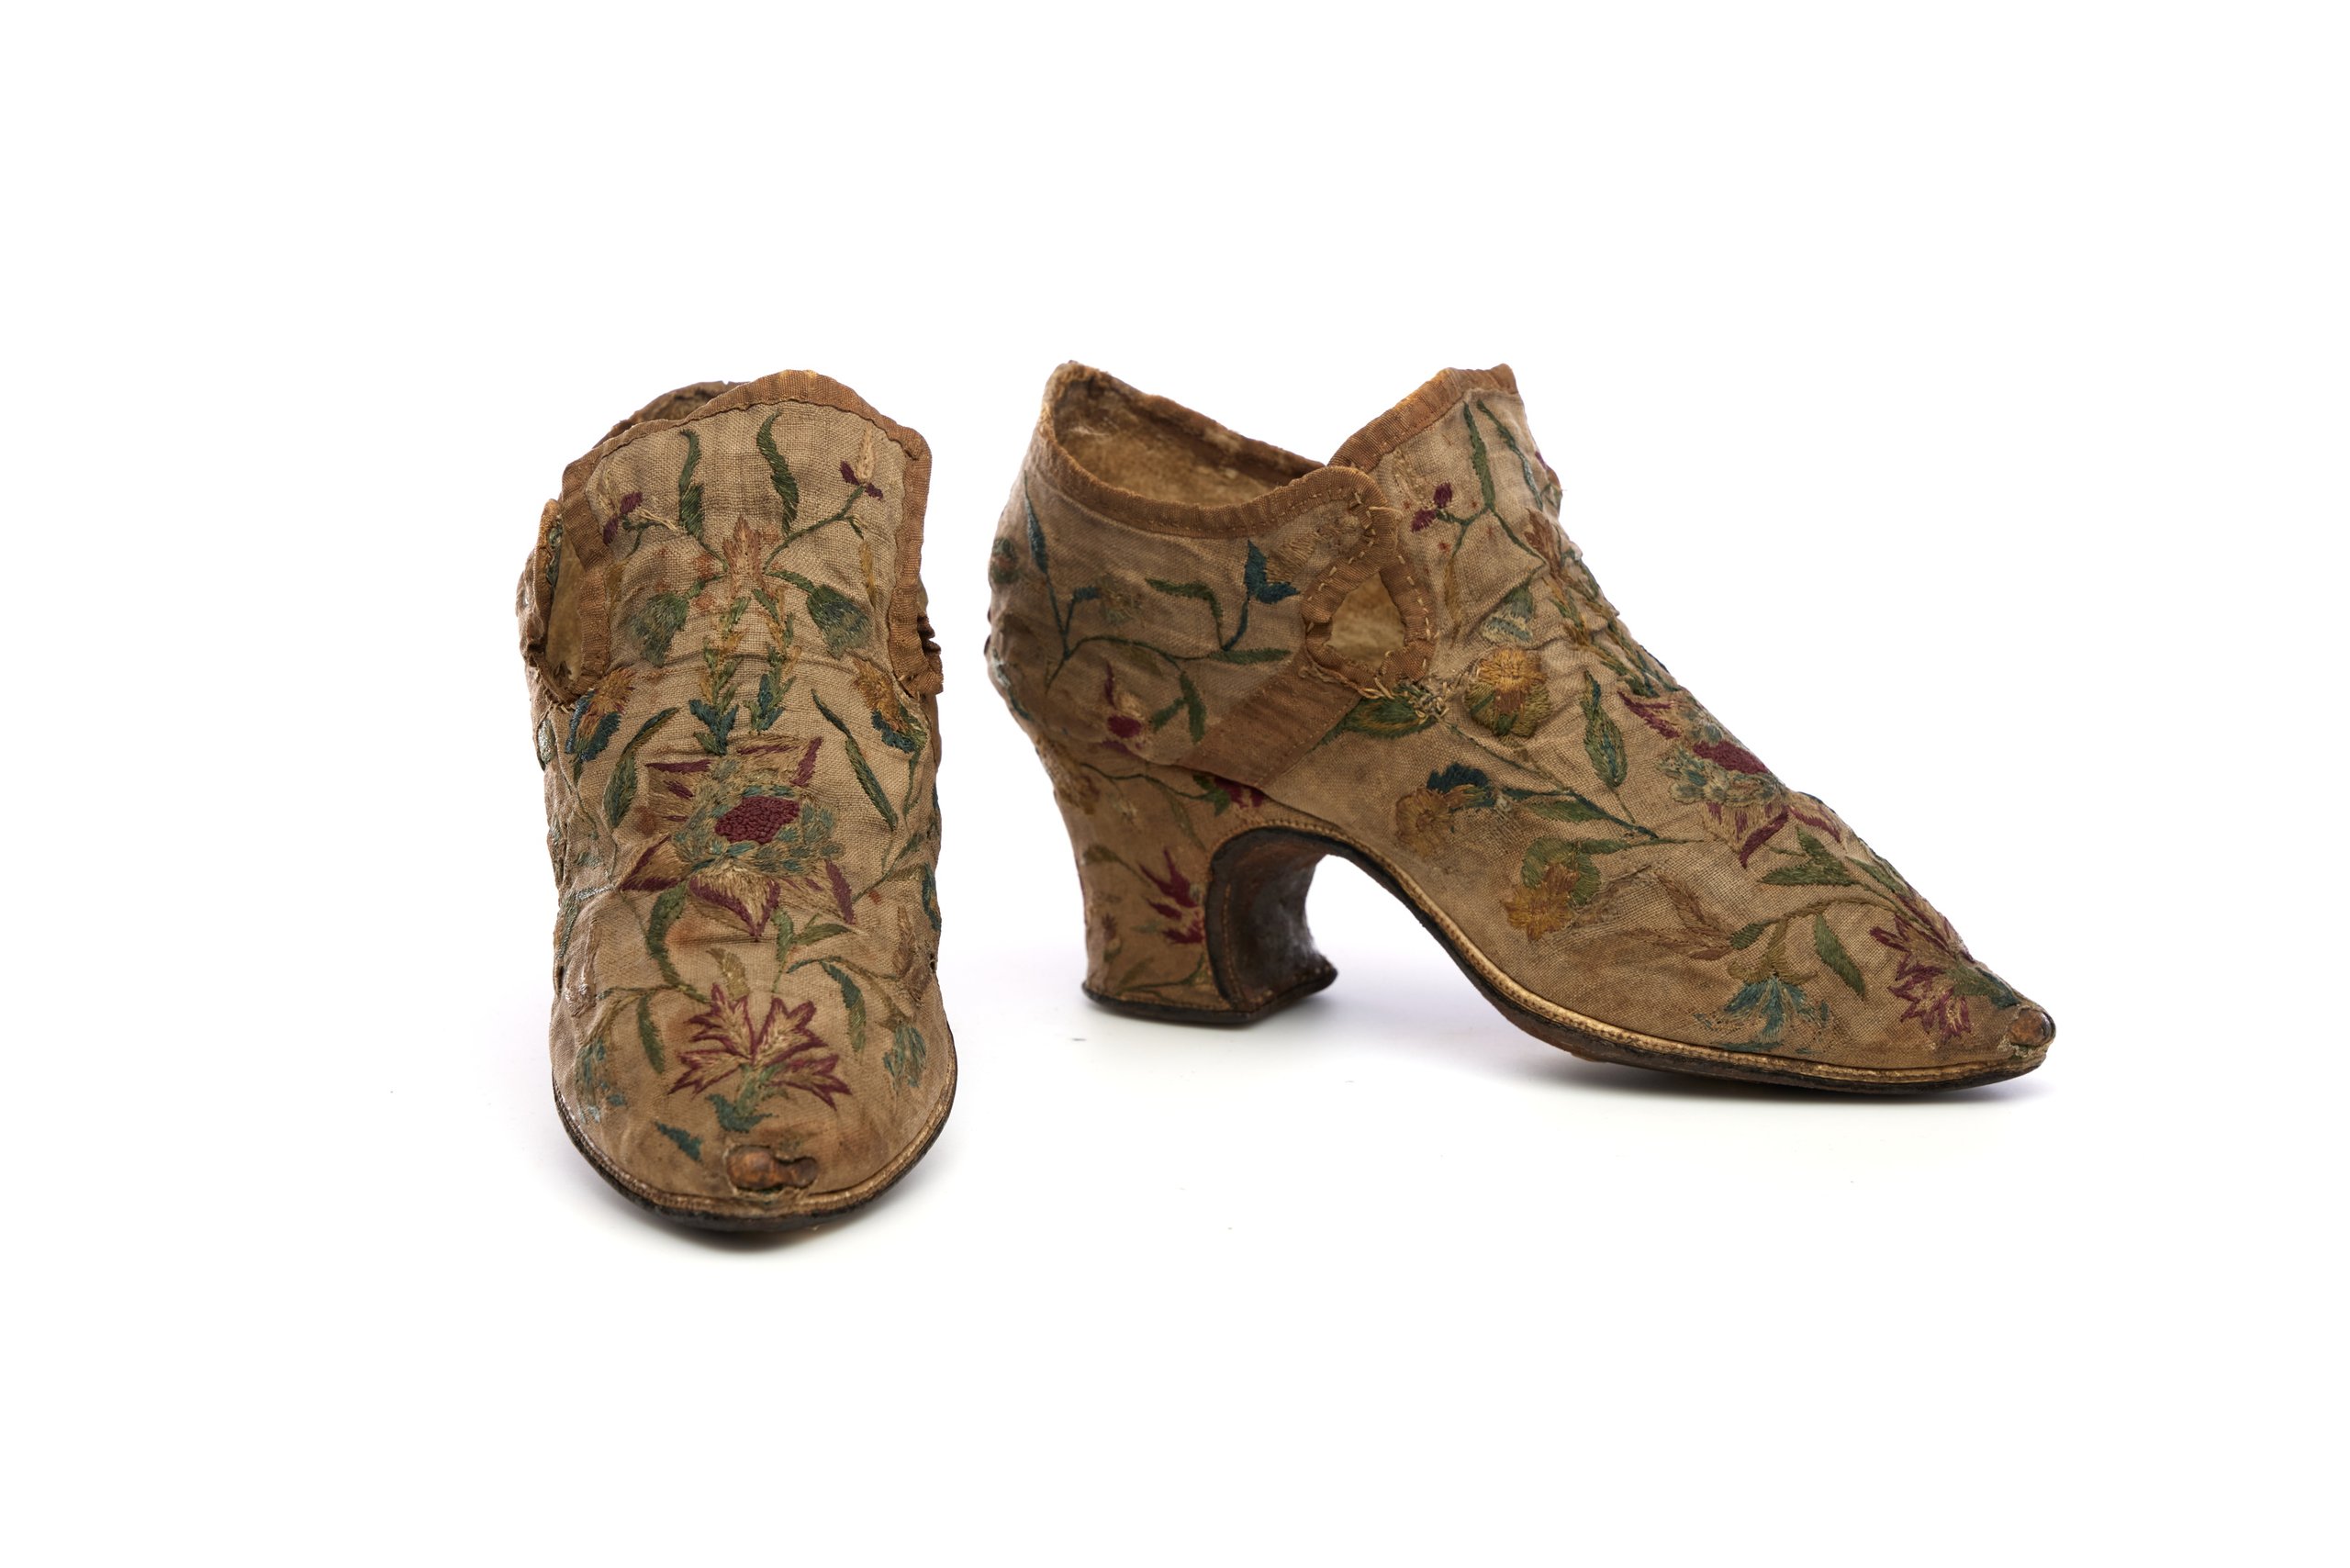 Pair of tie shoes from the Joseph Box collection